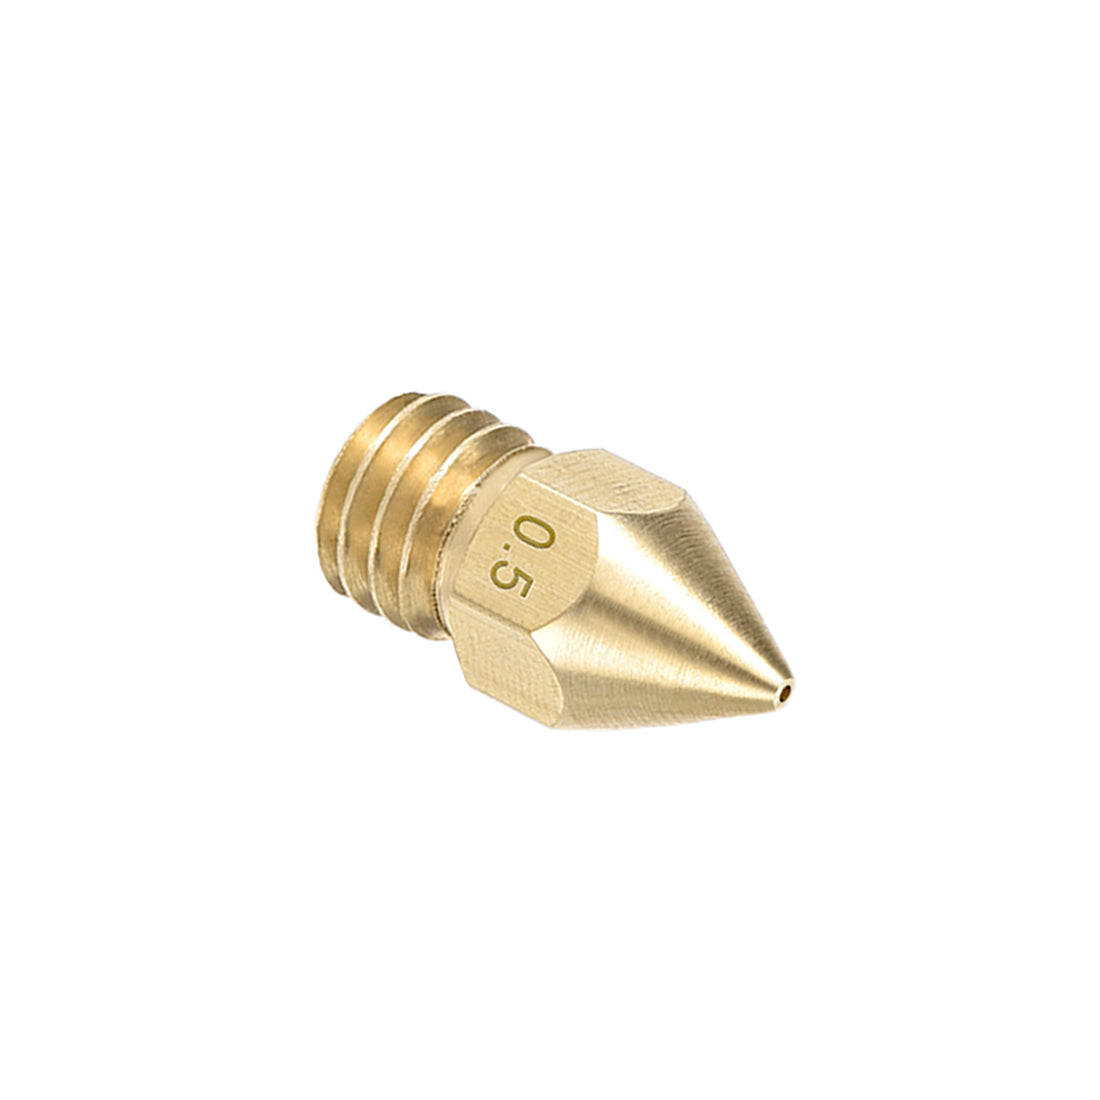 uxcell Uxcell 3D Printer Nozzle Fit for MK8,for 1.75mm Filament Brass,0.2mm - 0.5mm Total 5pcs